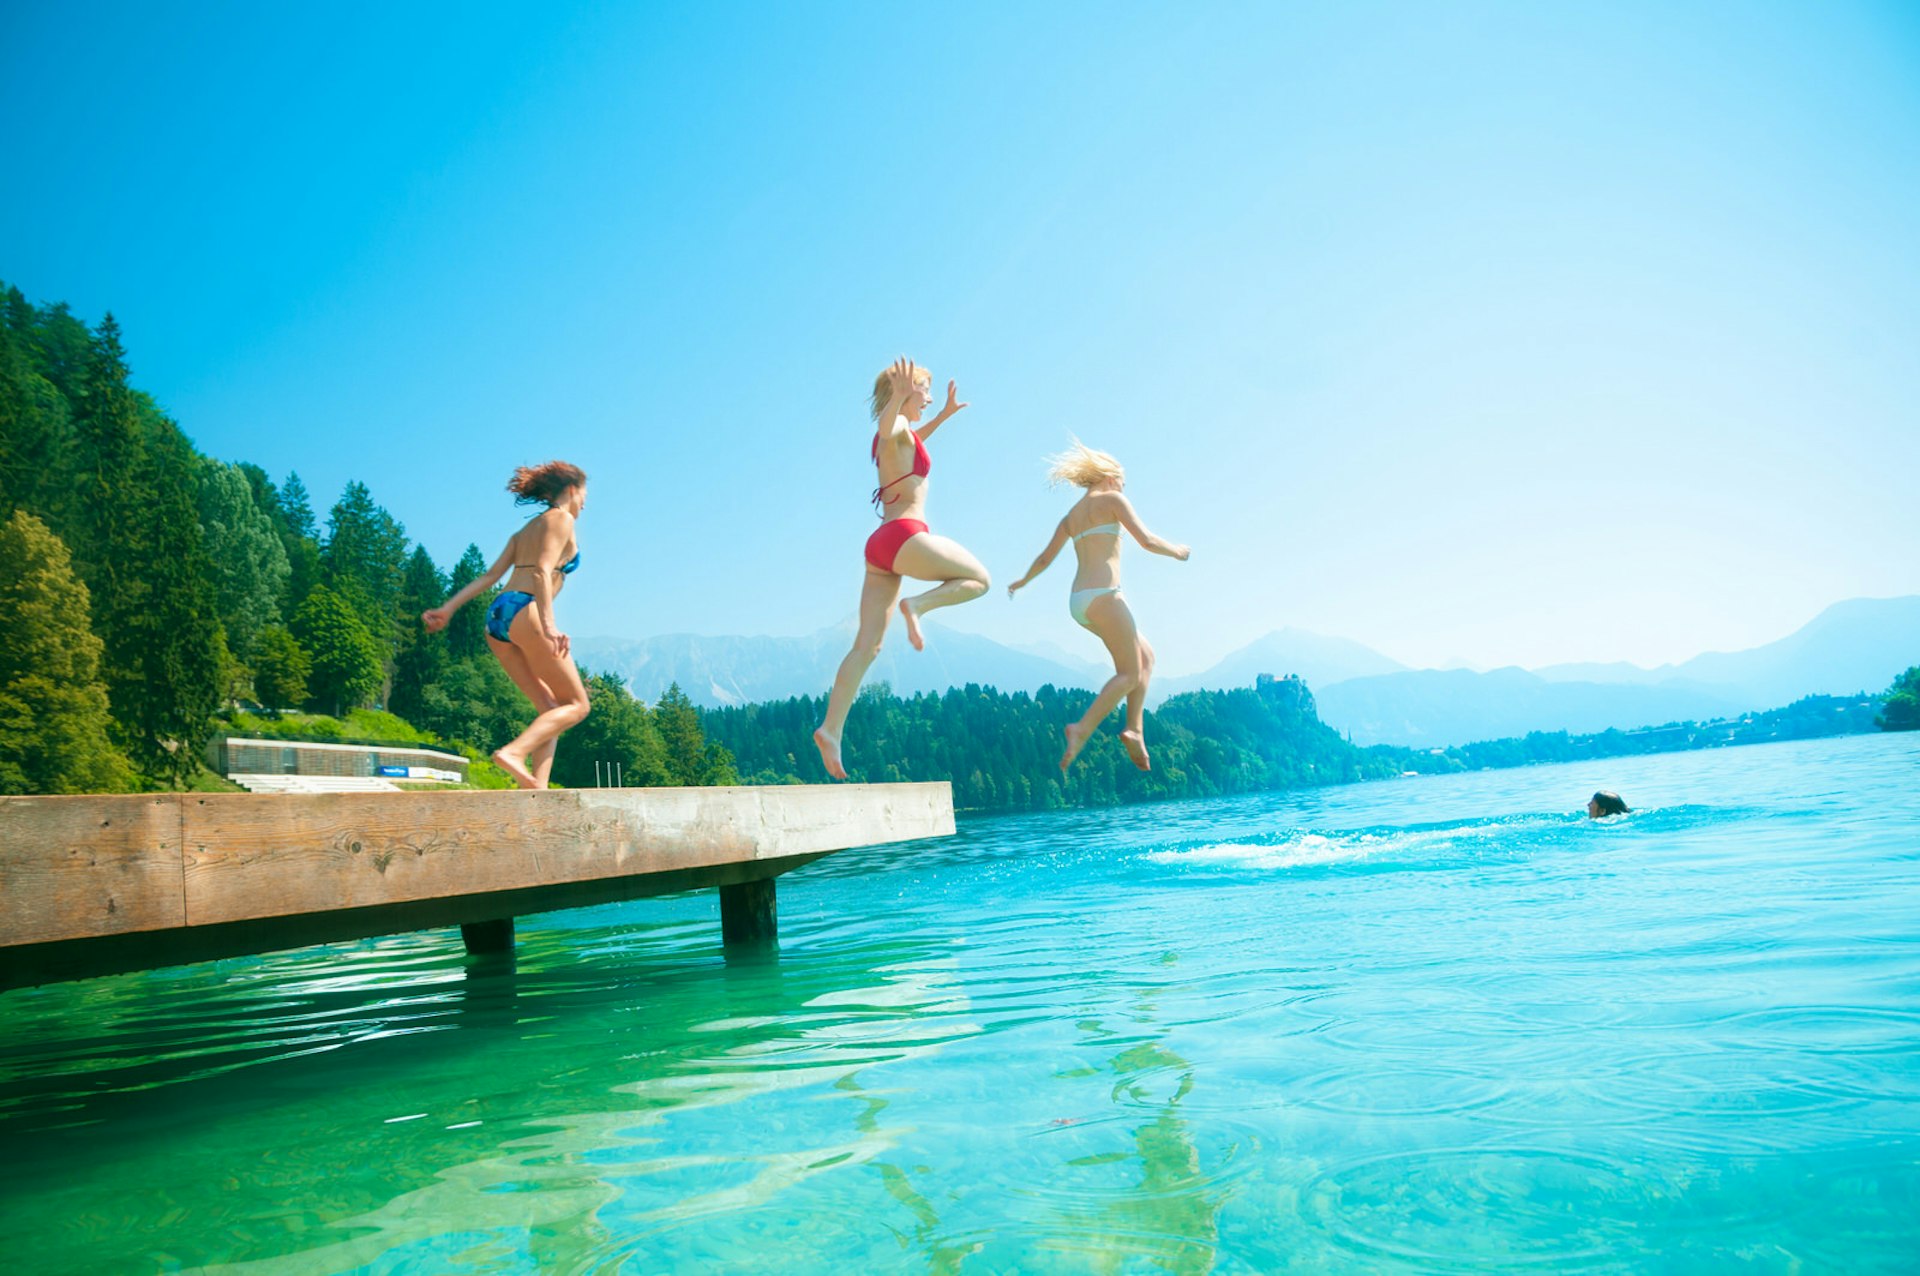 Three girls jump into Lake Bled, Slovenia on a summer's day